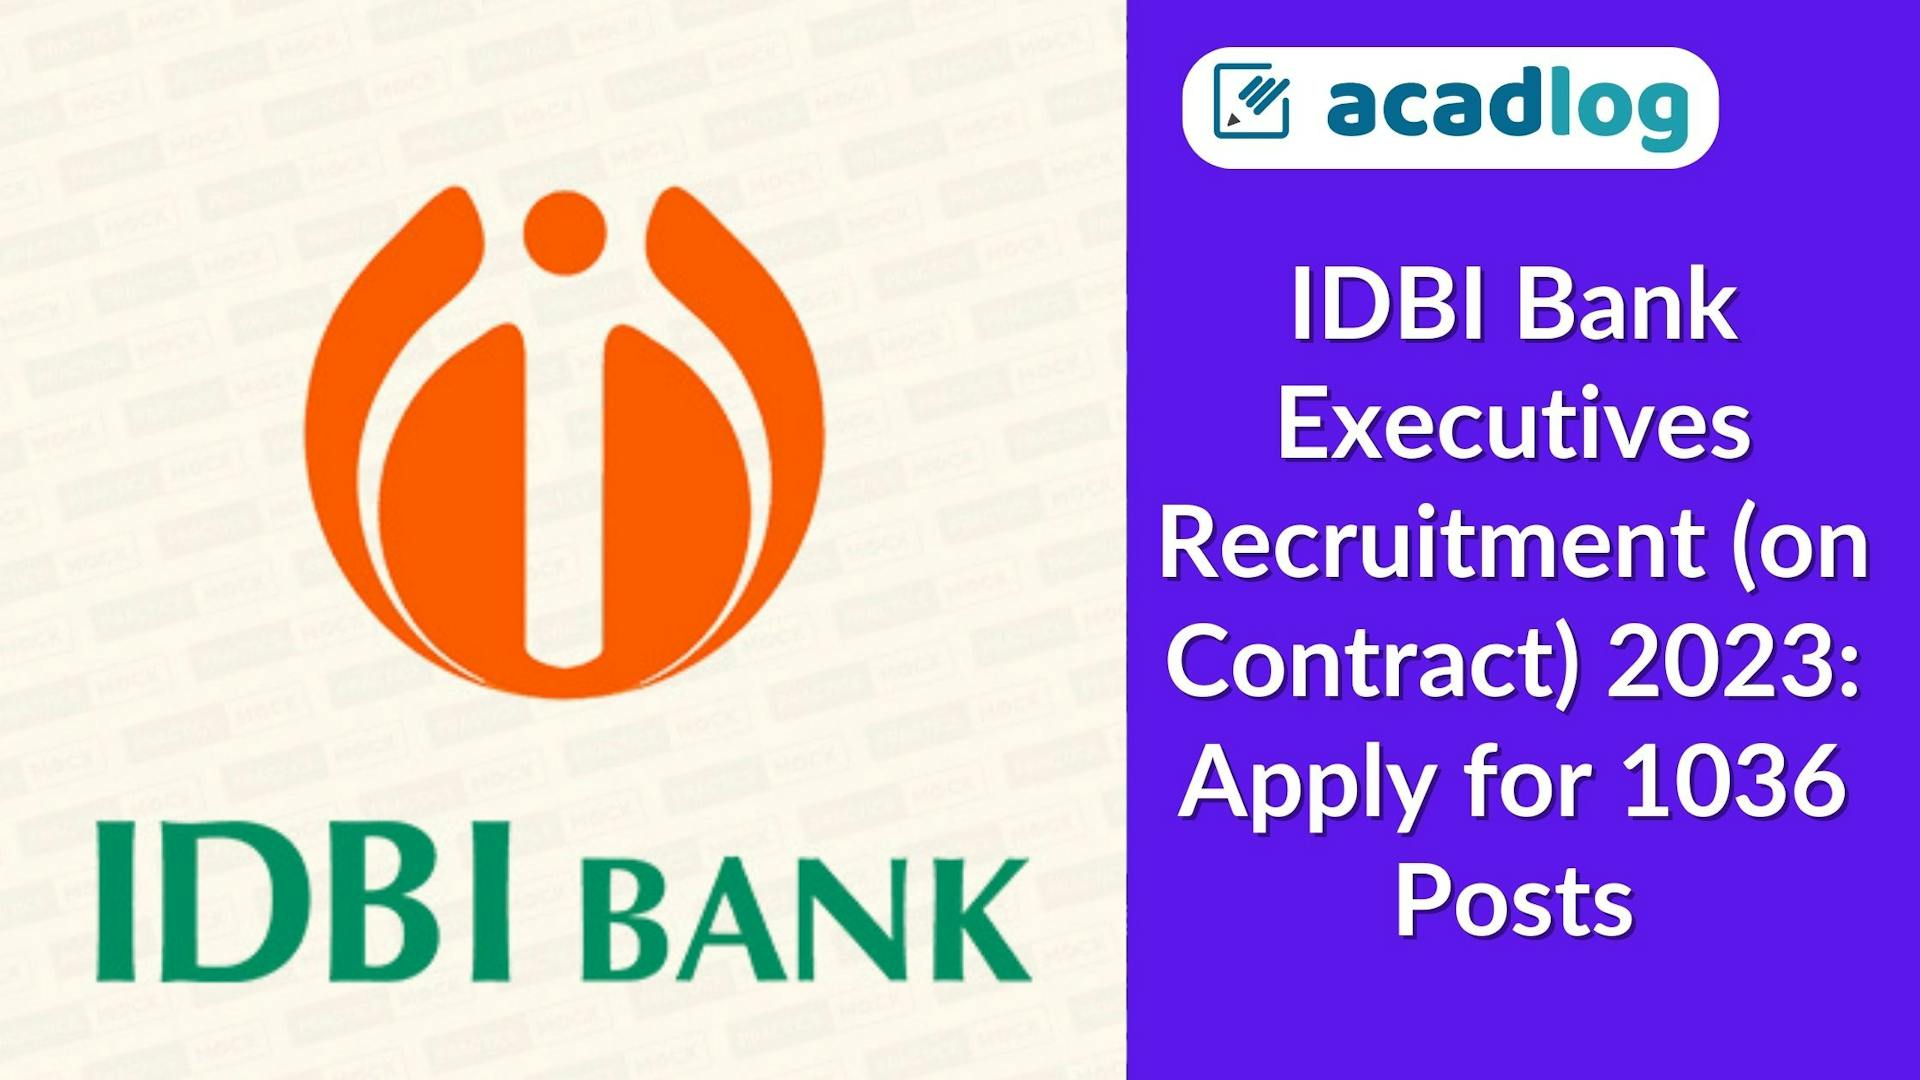 IDBI Bank Executives Recruitment (on Contract) 2023: Apply for 1036 Posts